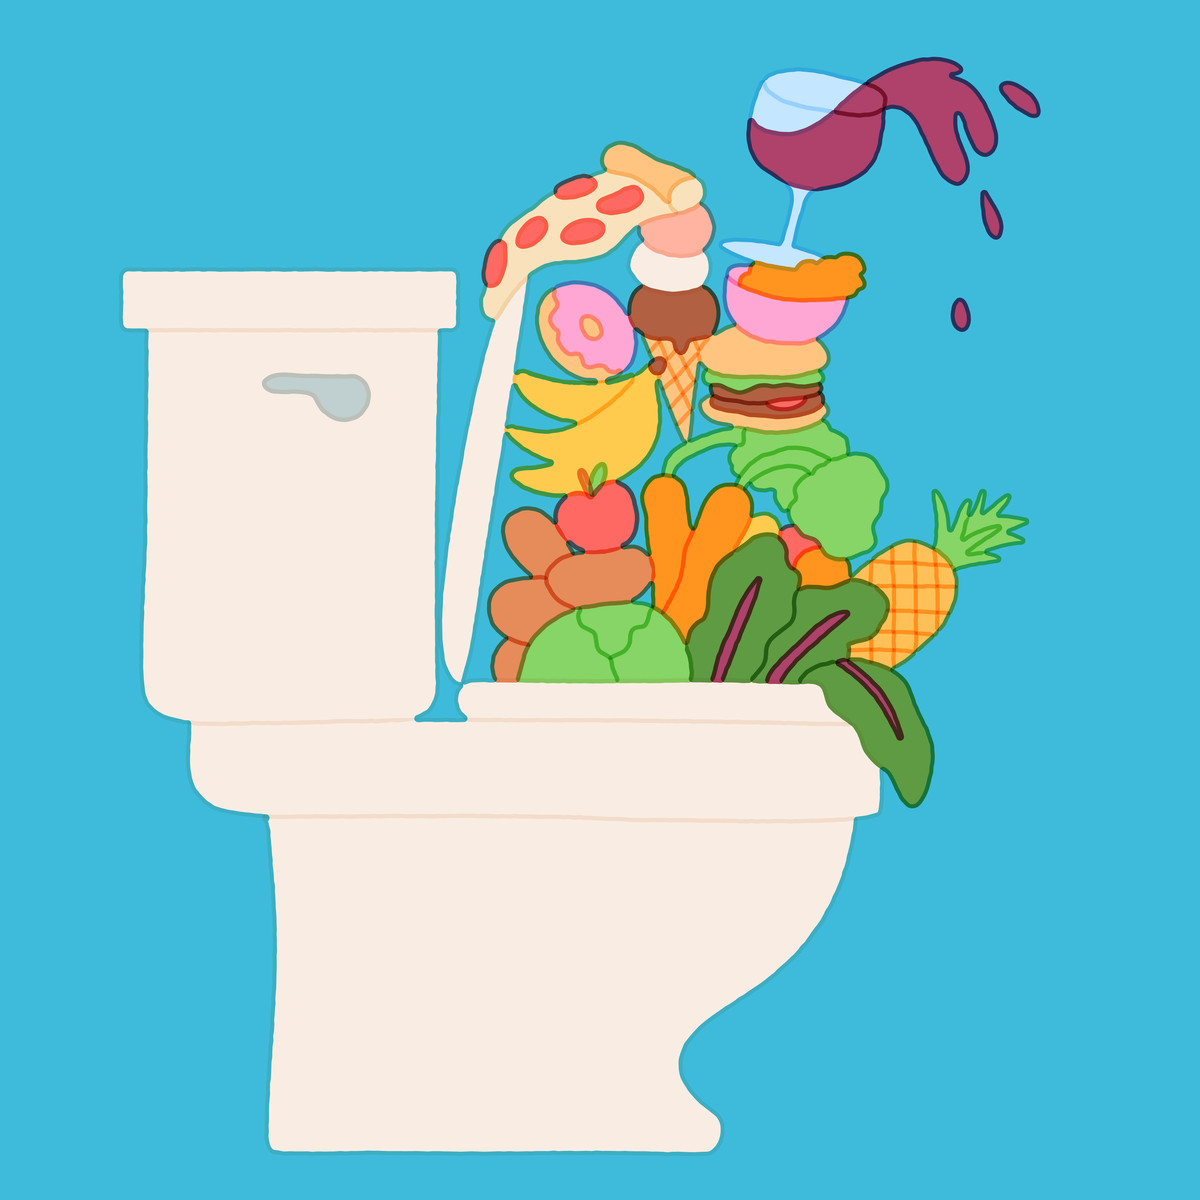 A toilet whose open bowl is stacked high with food. Illustration.